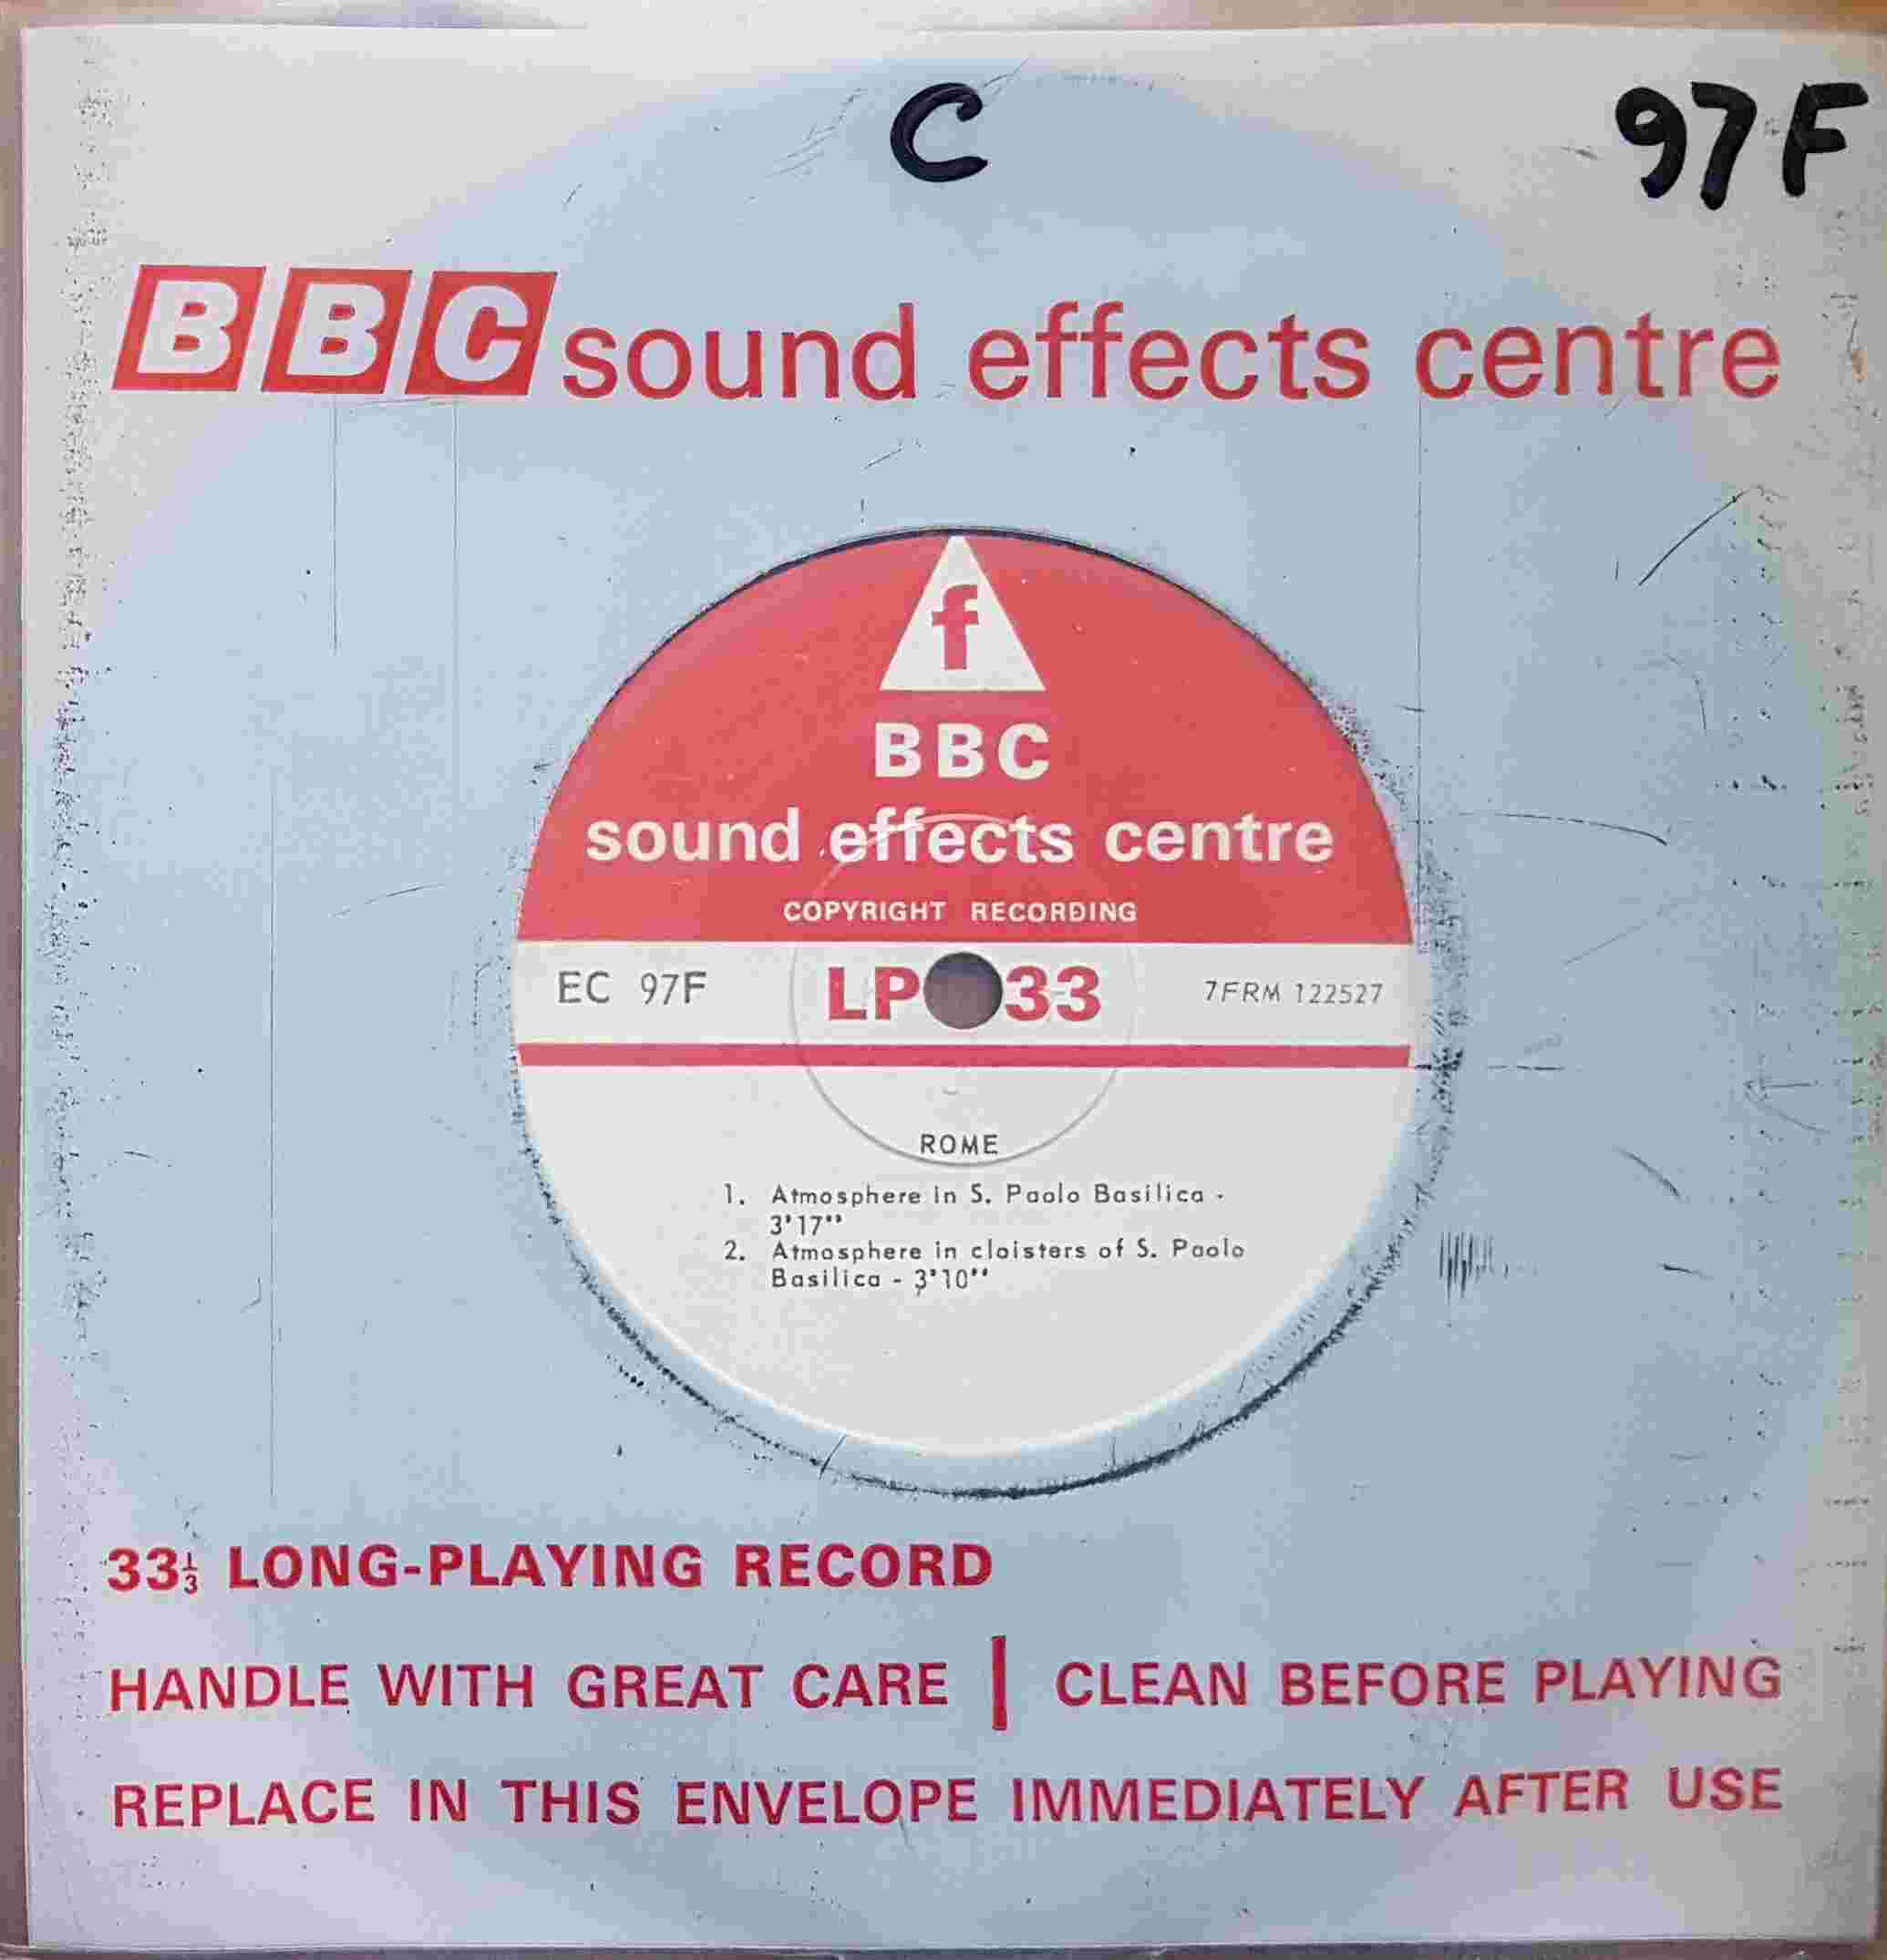 Picture of EC 97F Rome by artist Not registered from the BBC singles - Records and Tapes library